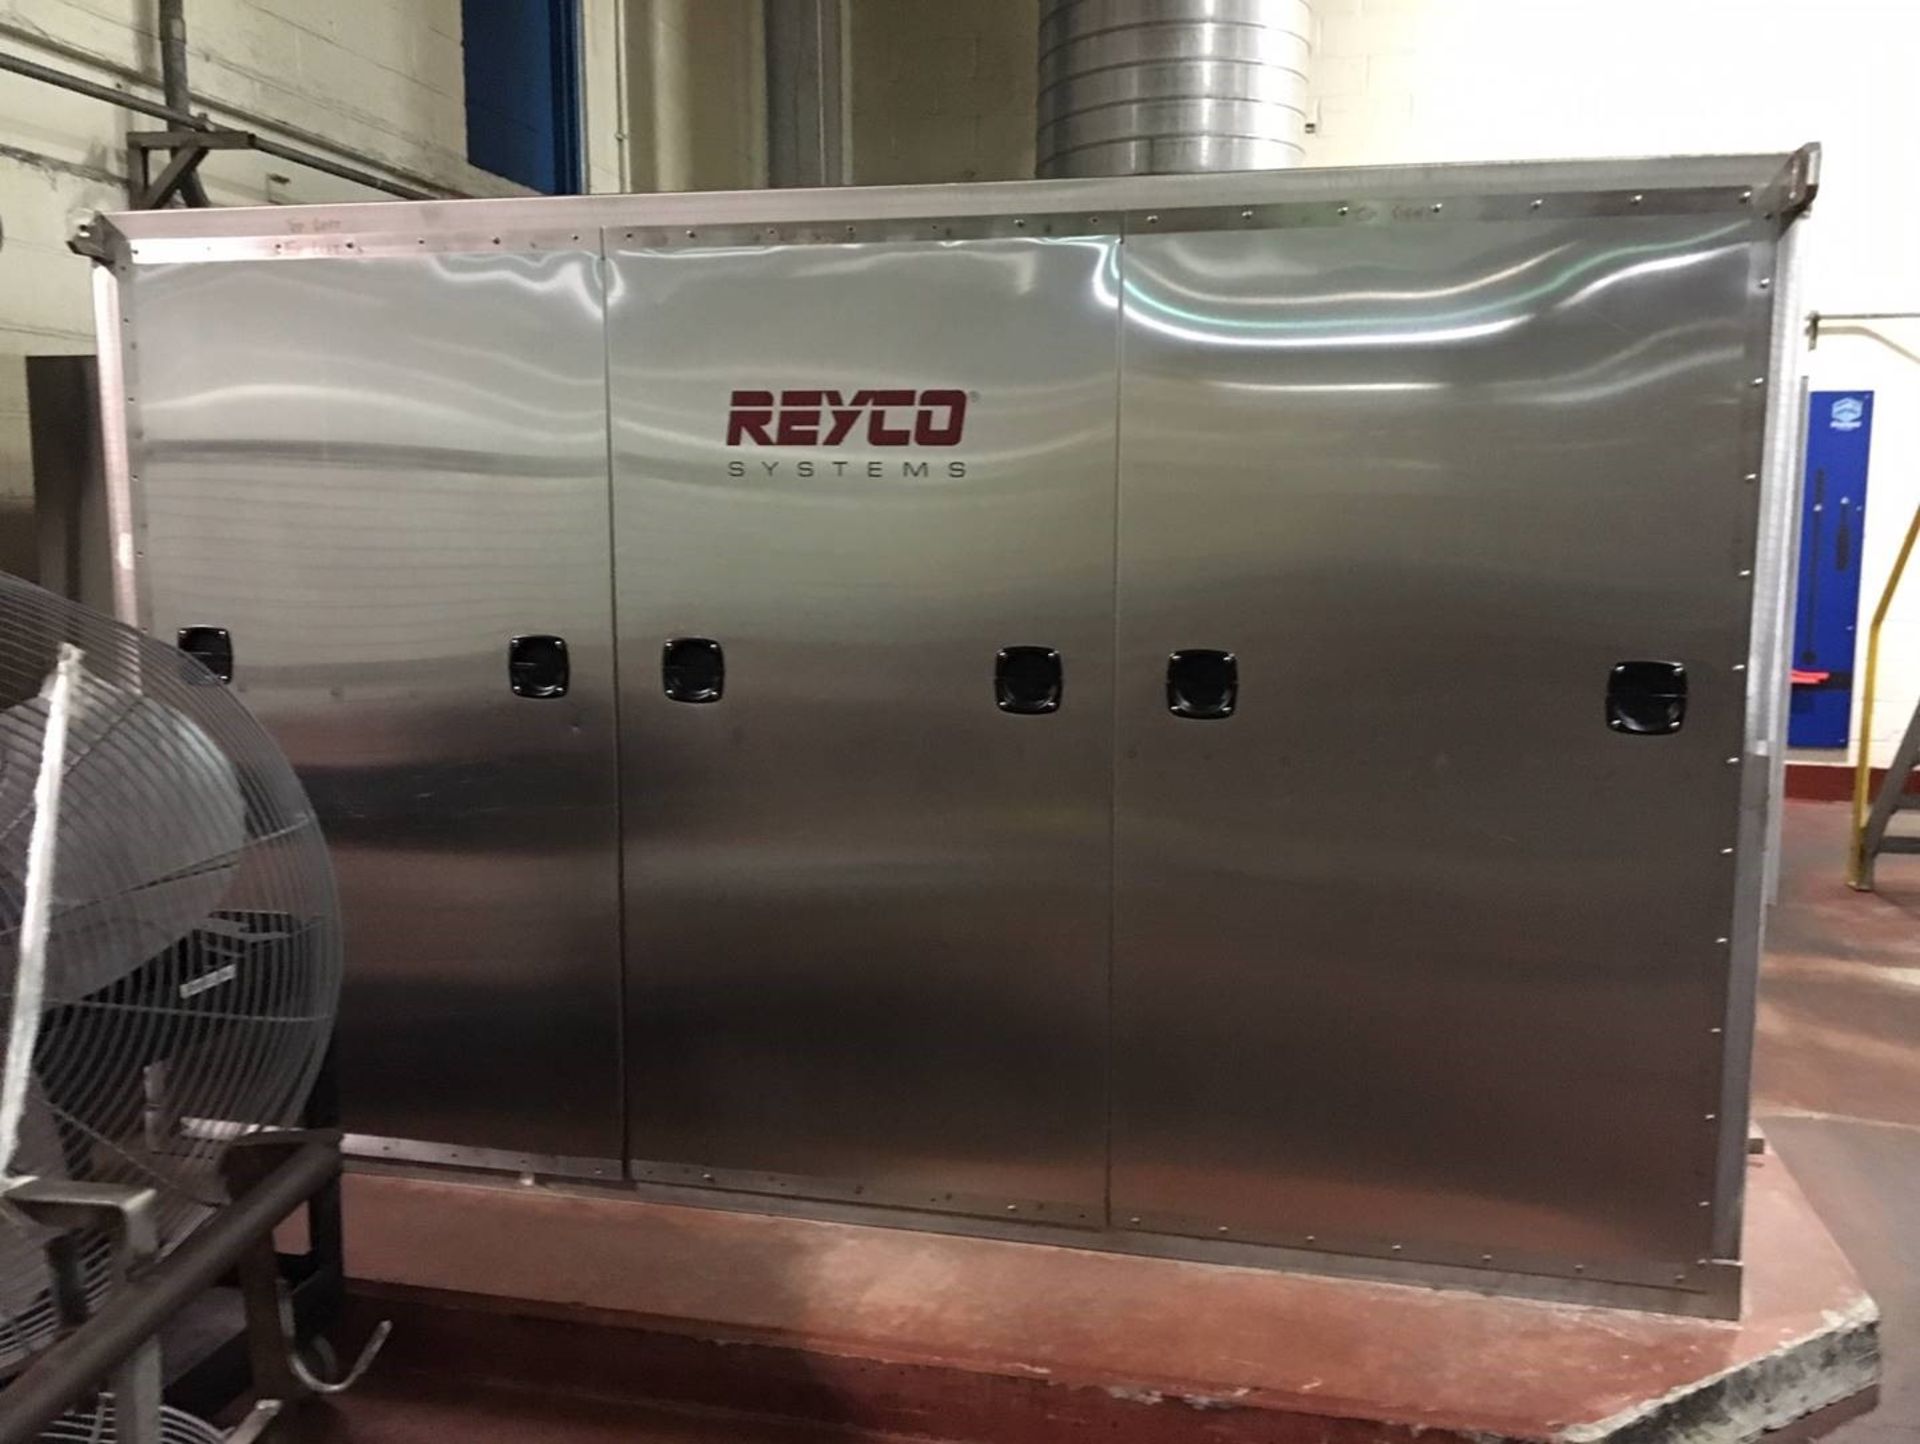 Reyco Systems S/S Vegetable Transfer Blower System, (Located on 2nd Floor)